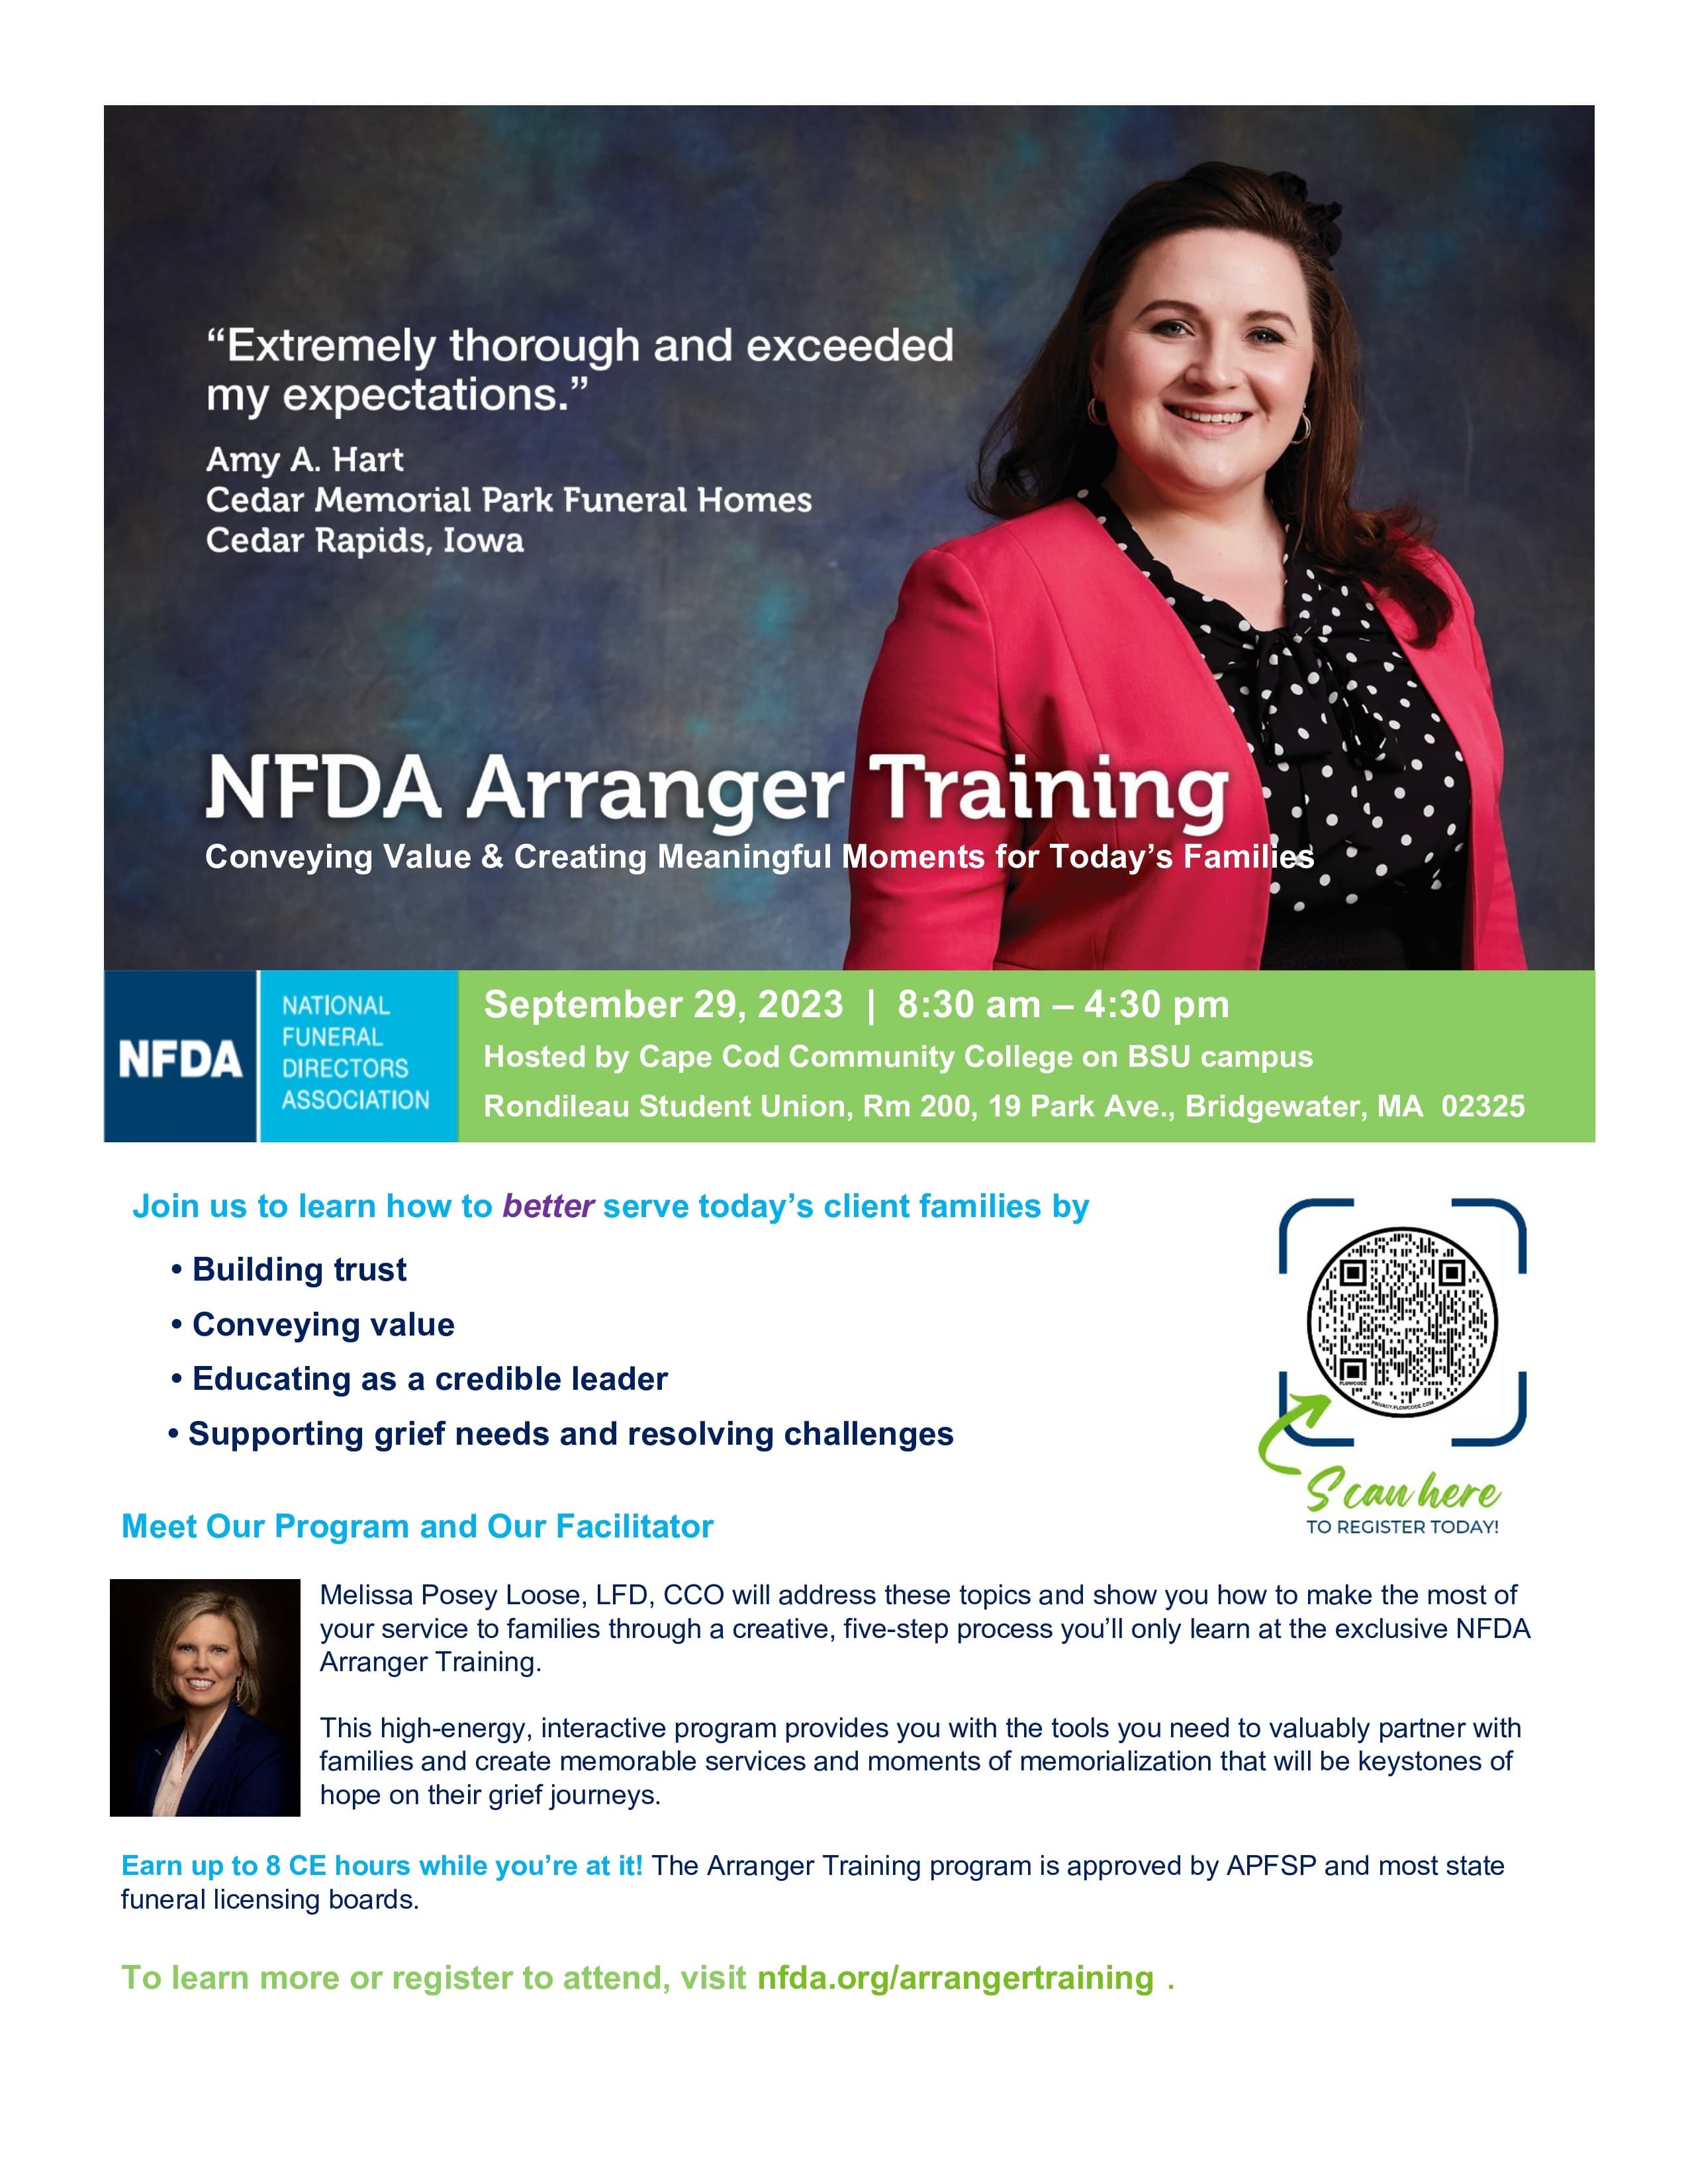 Improve your memorial services and arrangement conferences with the NFDA's arragner training hosted by Melissa Posey Loose, LFD, CCO